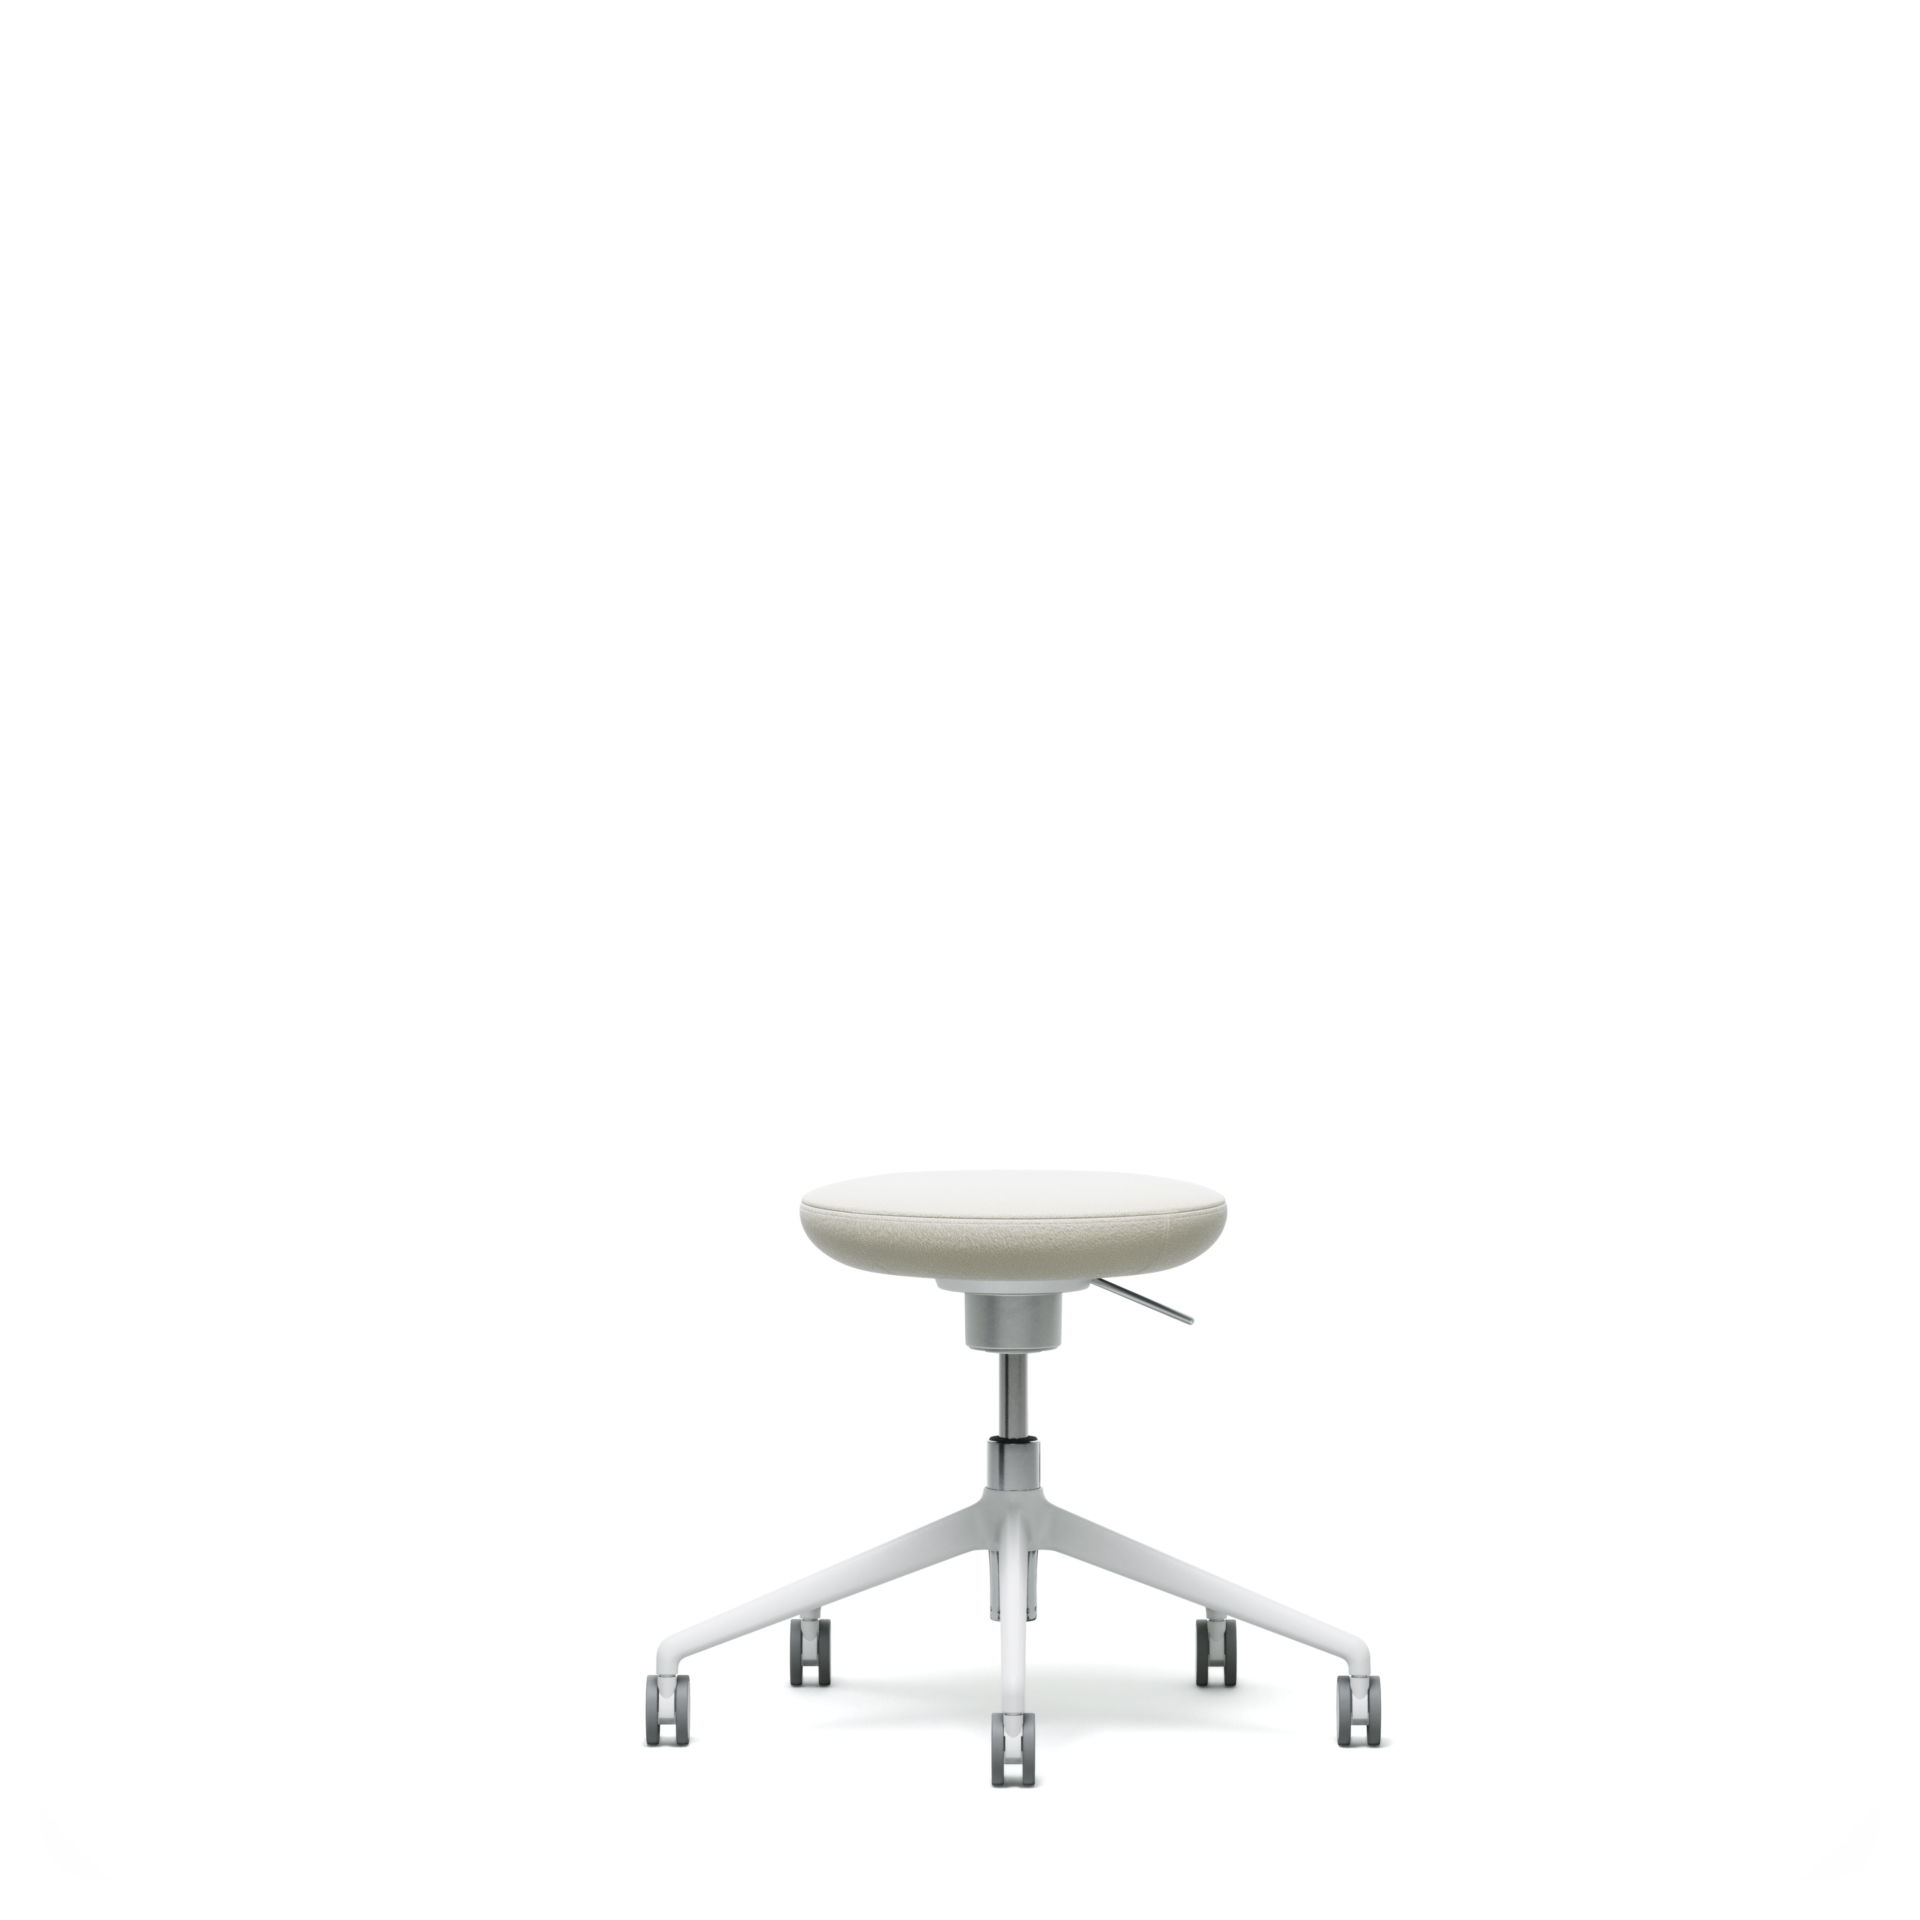 Spine Spine stool product image 3